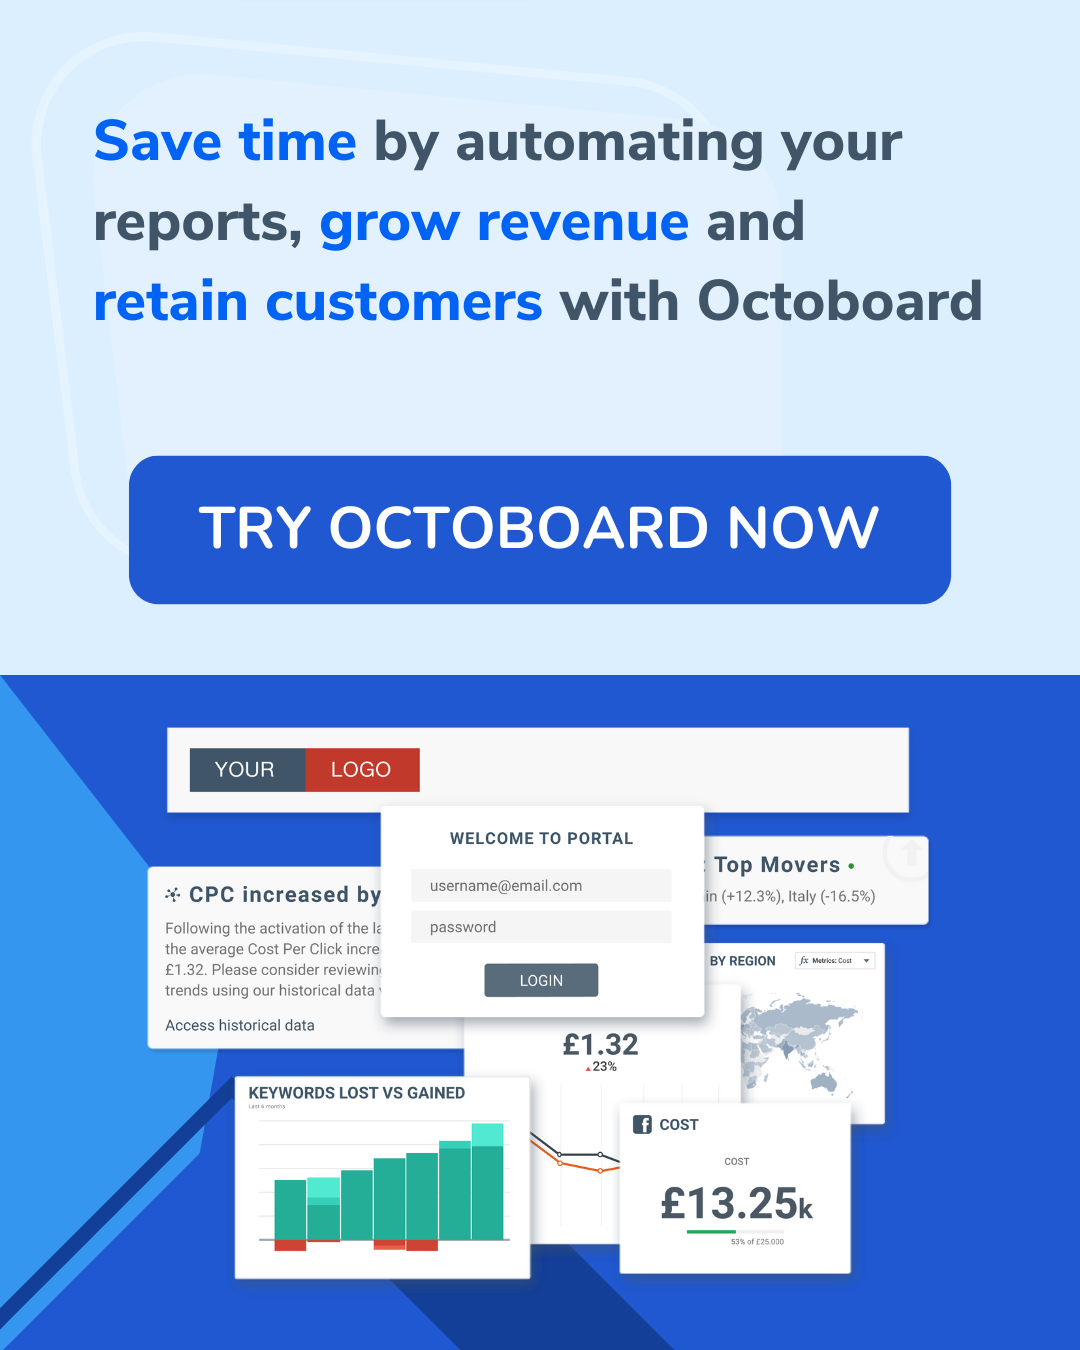 Save time by automating your reports, grow revenue and retain customers with Octoboard.